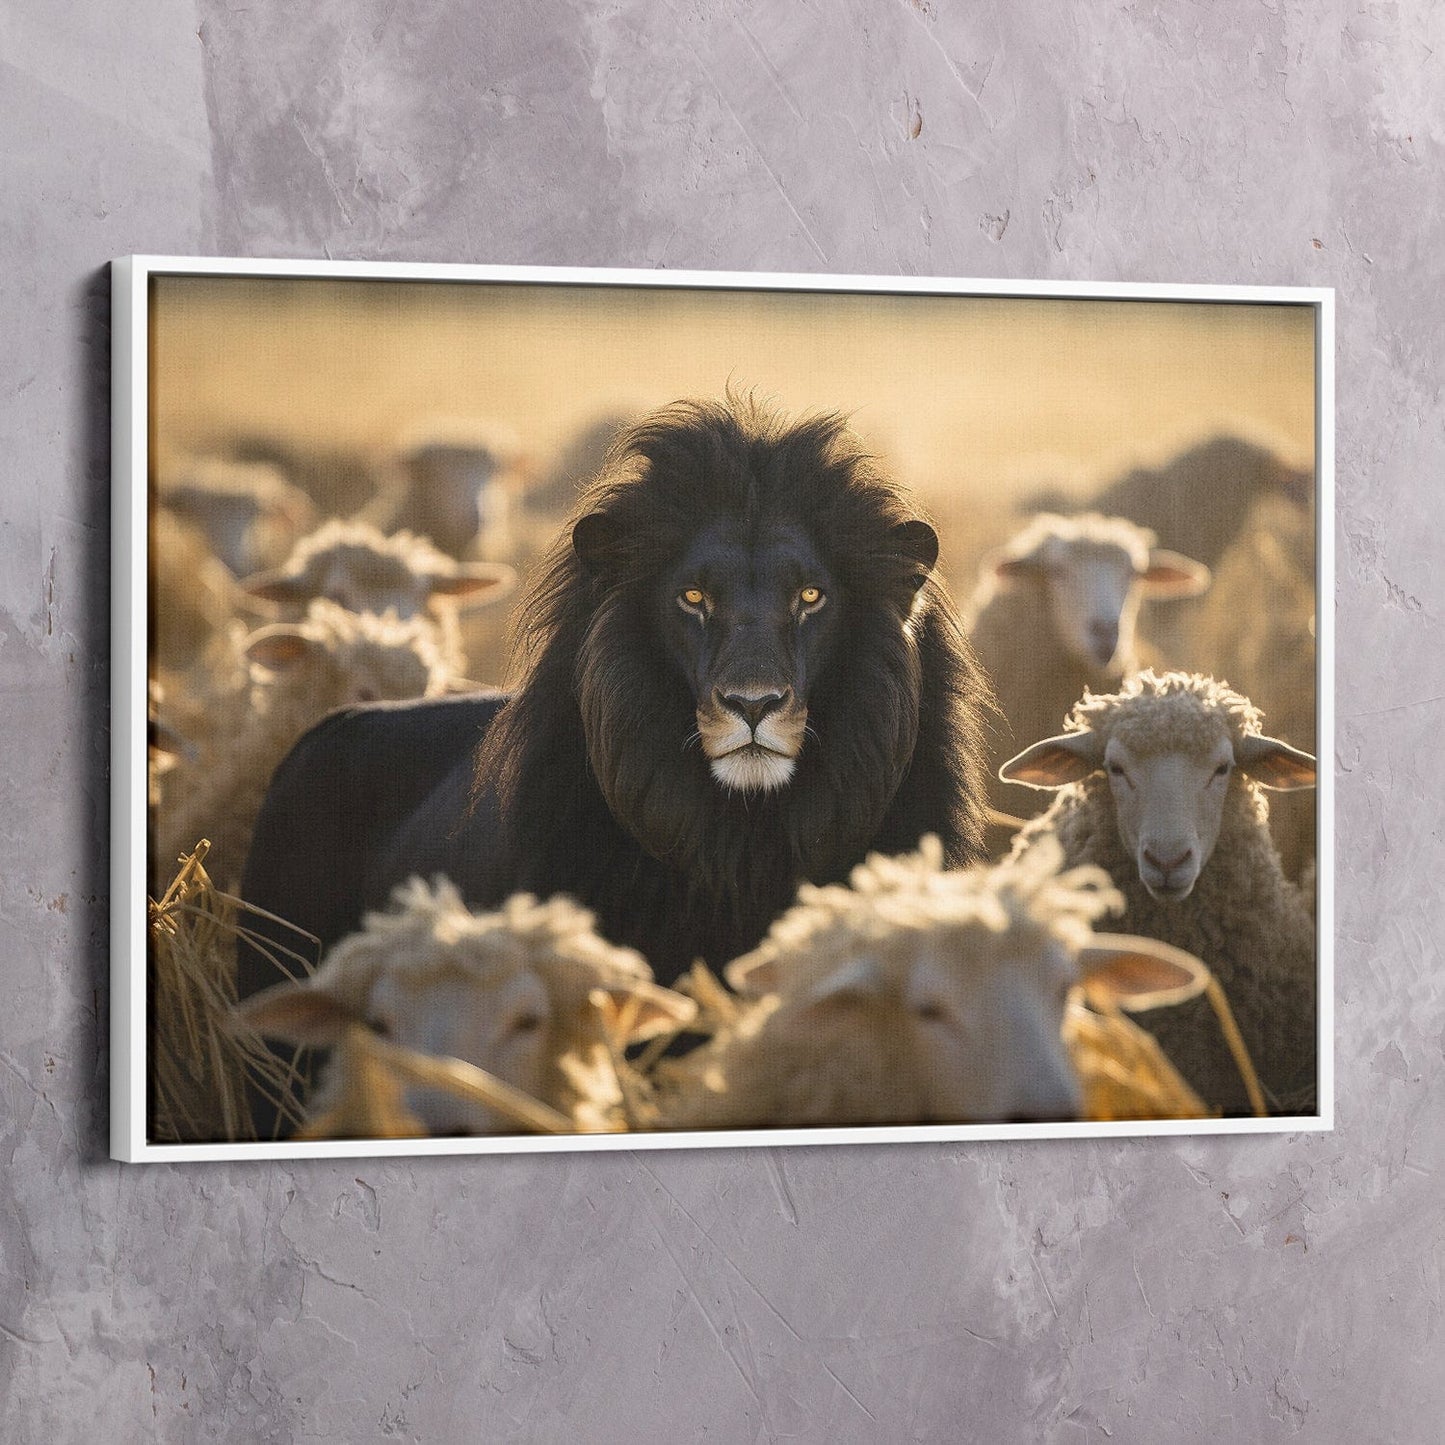 Embrace Courage: Lion Leading Sheep Wall Art for Fearless Leadership Canvas Art Landscape